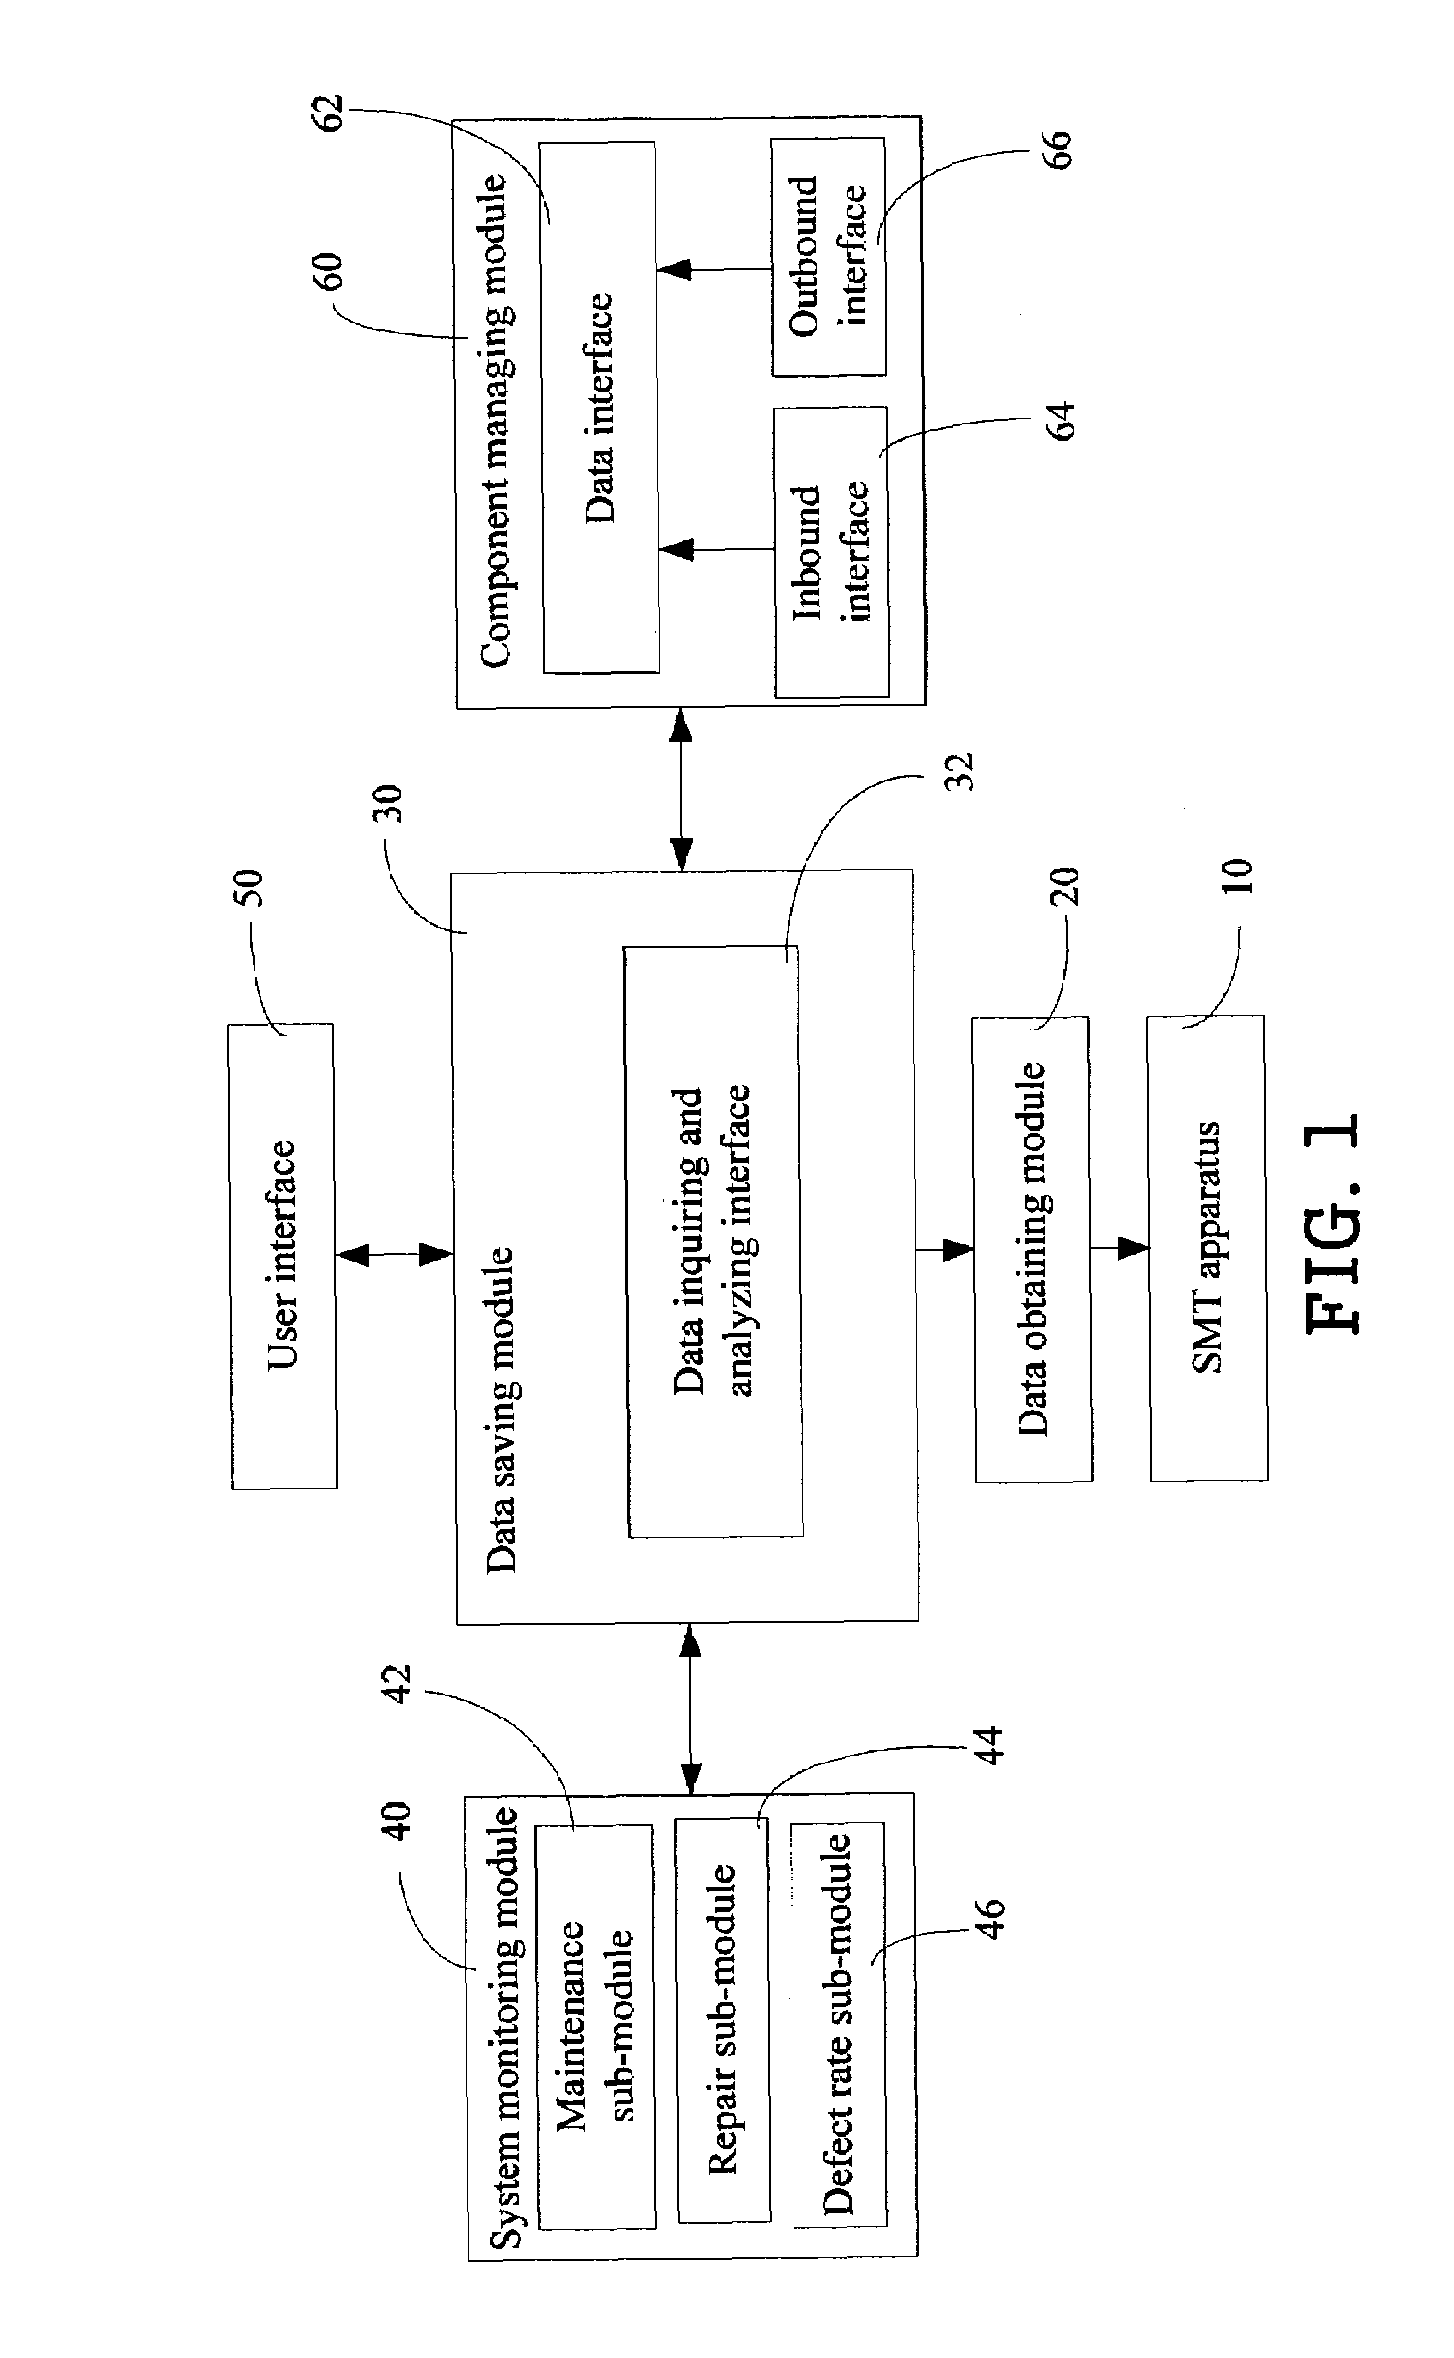 System and method for monitoring SMT apparatuses